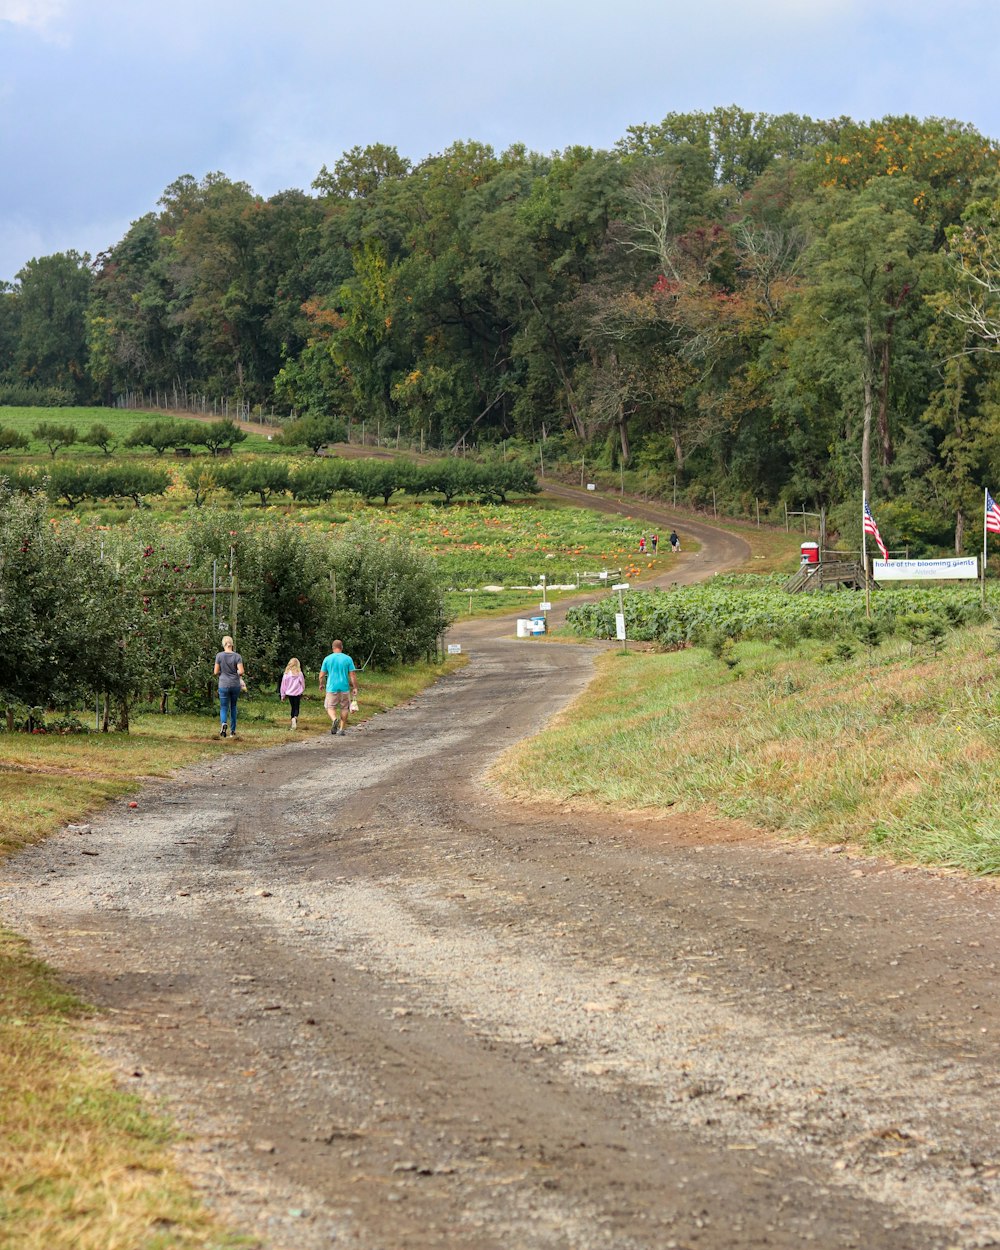 people walking on dirt road near green grass field during daytime